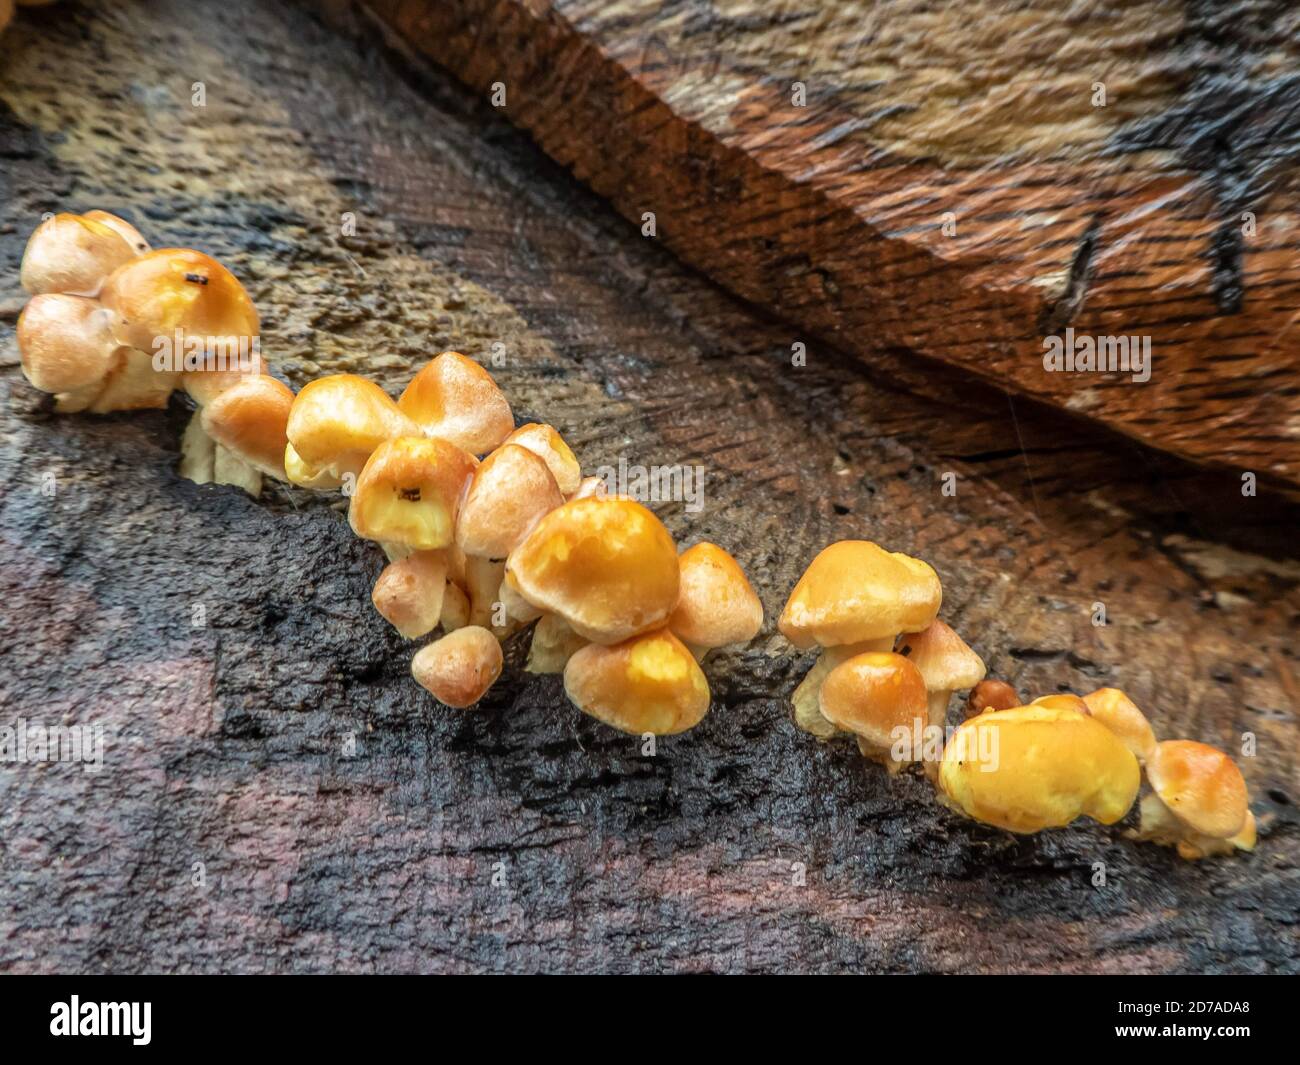 fungus growing on a tree a sign that Autumn has arrived Stock Photo